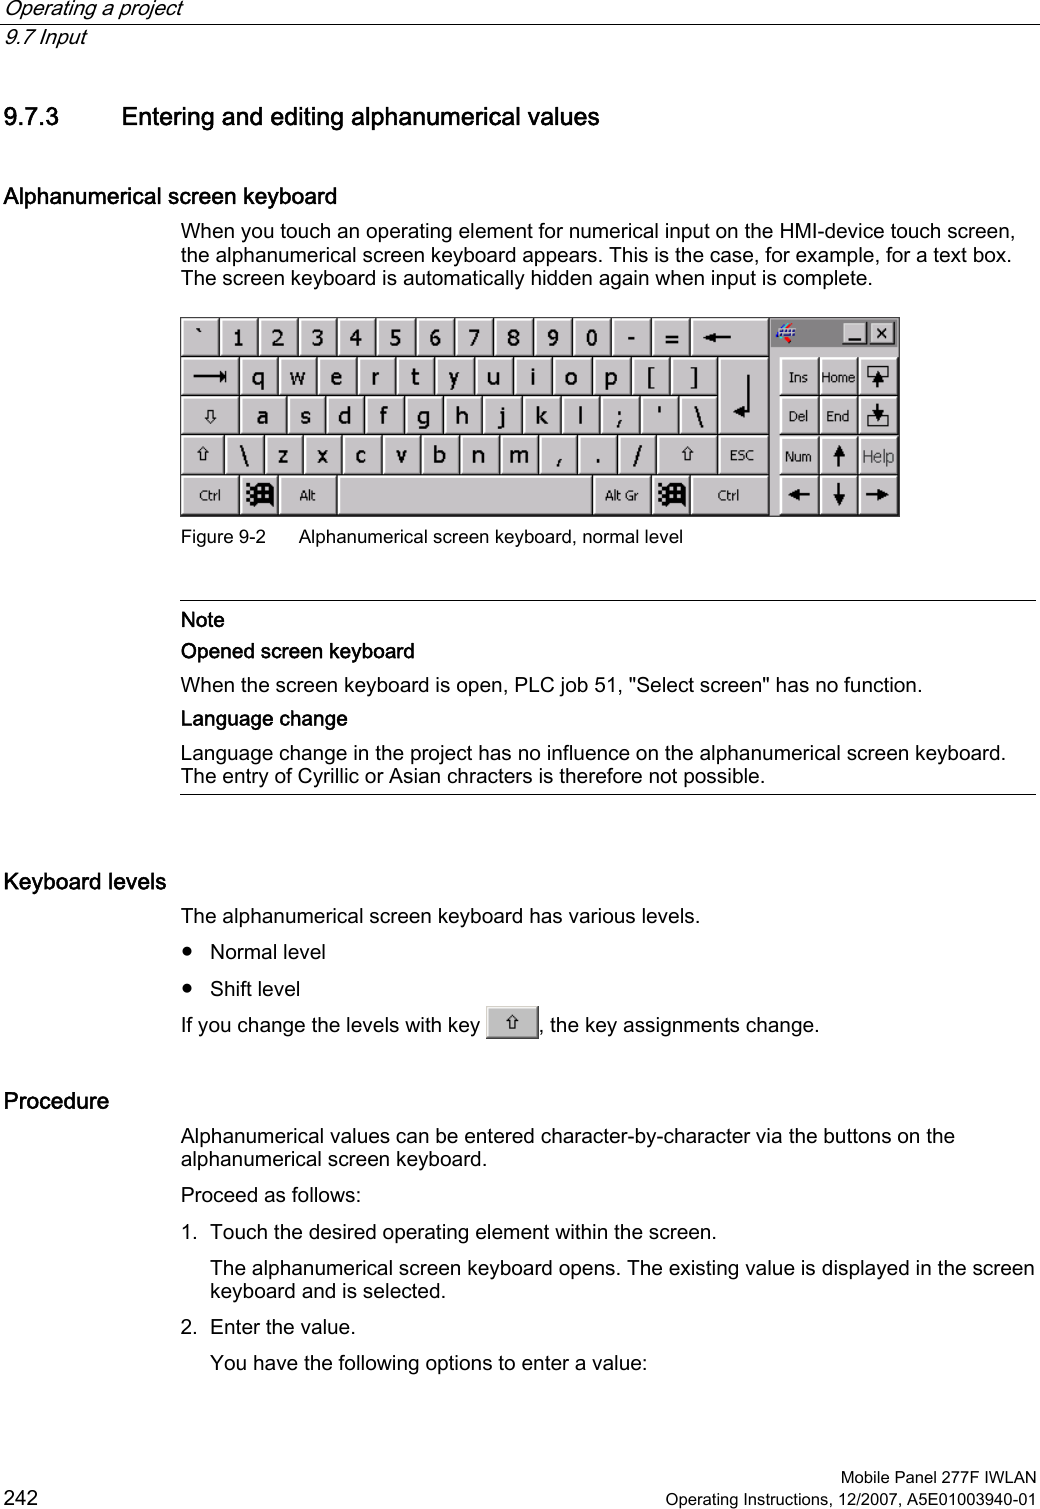 Operating a project   9.7 Input  Mobile Panel 277F IWLAN 242 Operating Instructions, 12/2007, A5E01003940-01 9.7.3 Entering and editing alphanumerical values Alphanumerical screen keyboard When you touch an operating element for numerical input on the HMI-device touch screen, the alphanumerical screen keyboard appears. This is the case, for example, for a text box. The screen keyboard is automatically hidden again when input is complete.   Figure 9-2  Alphanumerical screen keyboard, normal level   Note Opened screen keyboard When the screen keyboard is open, PLC job 51, &quot;Select screen&quot; has no function. Language change Language change in the project has no influence on the alphanumerical screen keyboard. The entry of Cyrillic or Asian chracters is therefore not possible.   Keyboard levels The alphanumerical screen keyboard has various levels.  ●  Normal level ●  Shift level If you change the levels with key  , the key assignments change. Procedure Alphanumerical values can be entered character-by-character via the buttons on the alphanumerical screen keyboard.  Proceed as follows: 1. Touch the desired operating element within the screen. The alphanumerical screen keyboard opens. The existing value is displayed in the screen keyboard and is selected. 2. Enter the value. You have the following options to enter a value: 